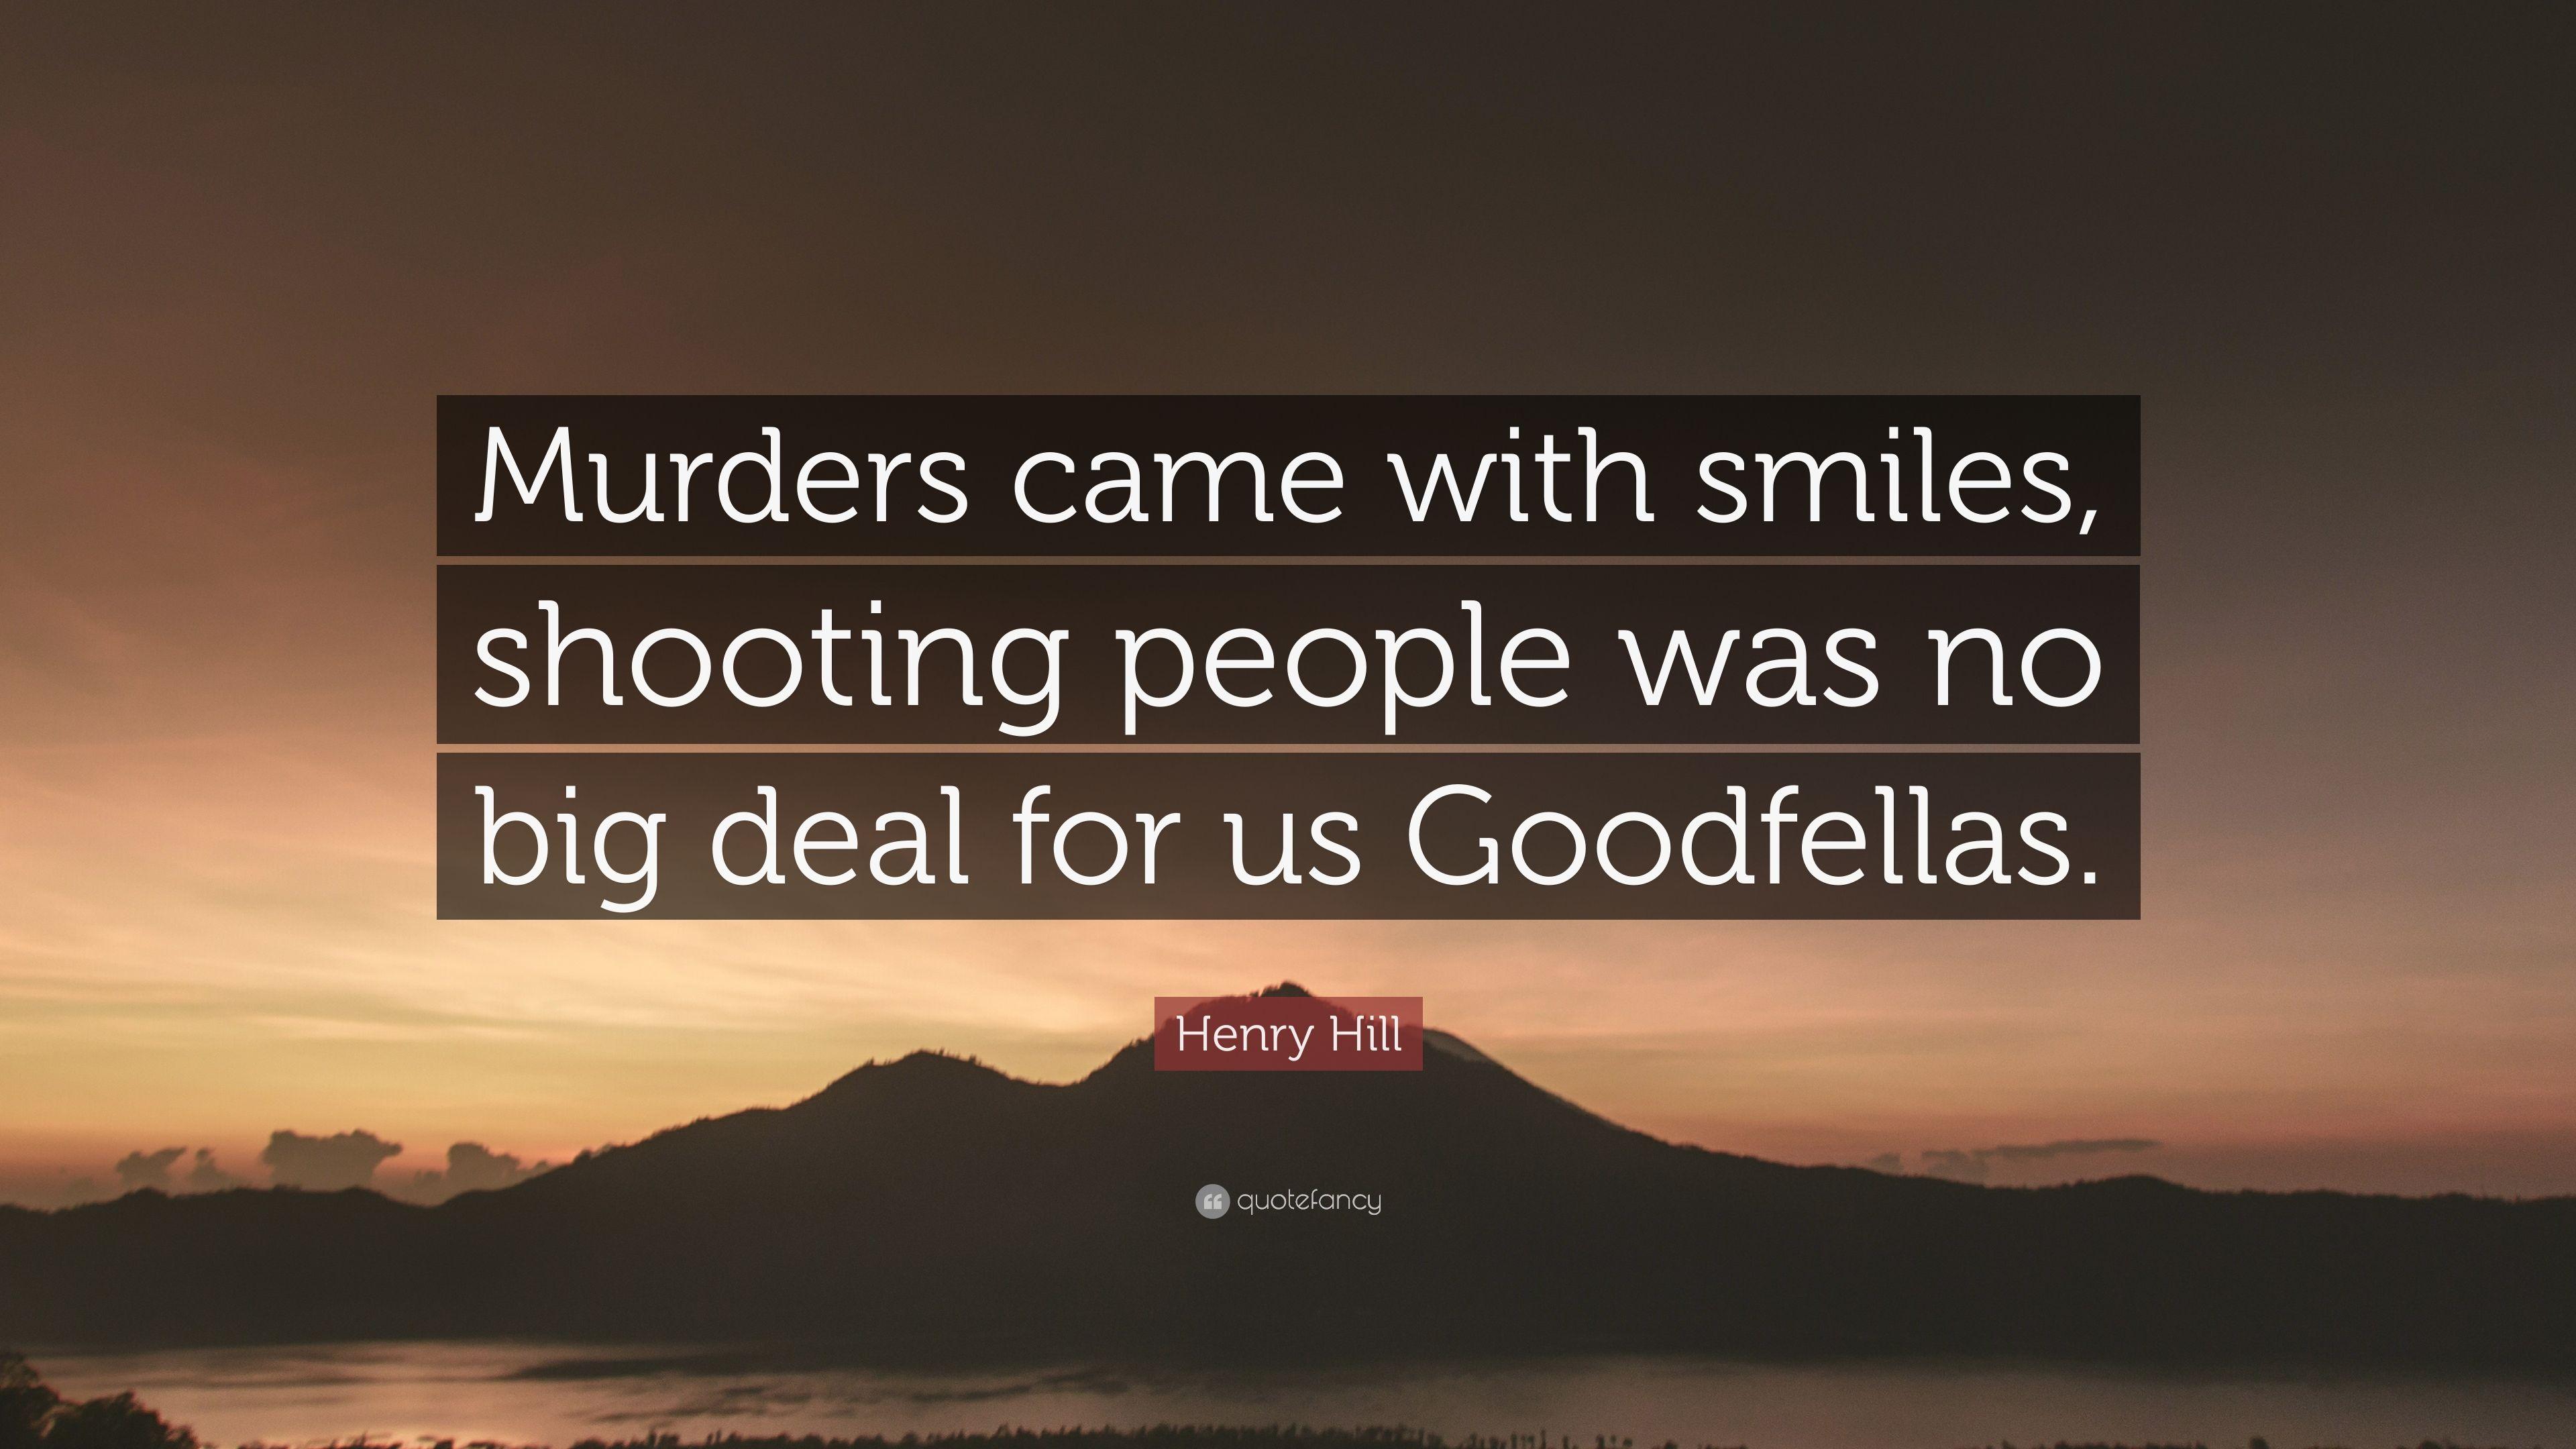 Henry Hill Quote: “Murders came with smiles, shooting people was no